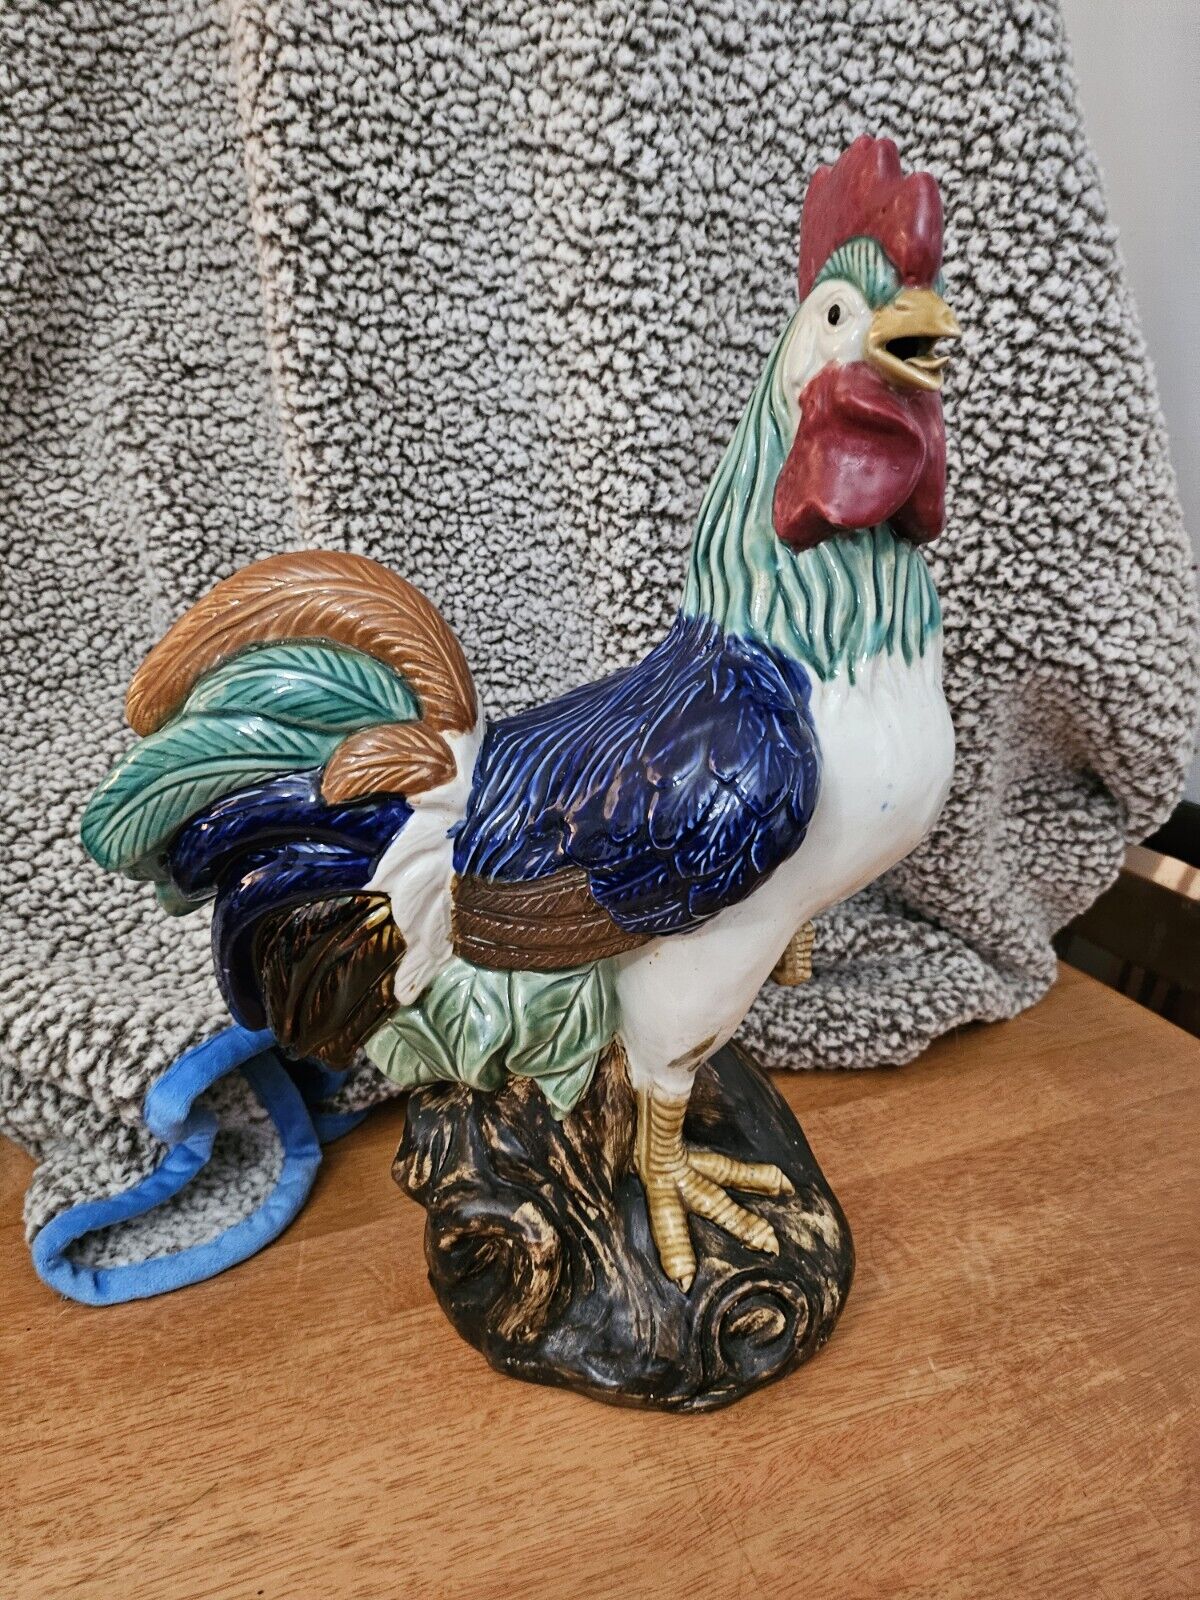 Three Hands Corp Large Ceramic Rooster 17” Tall Excellent Condition No Flaws